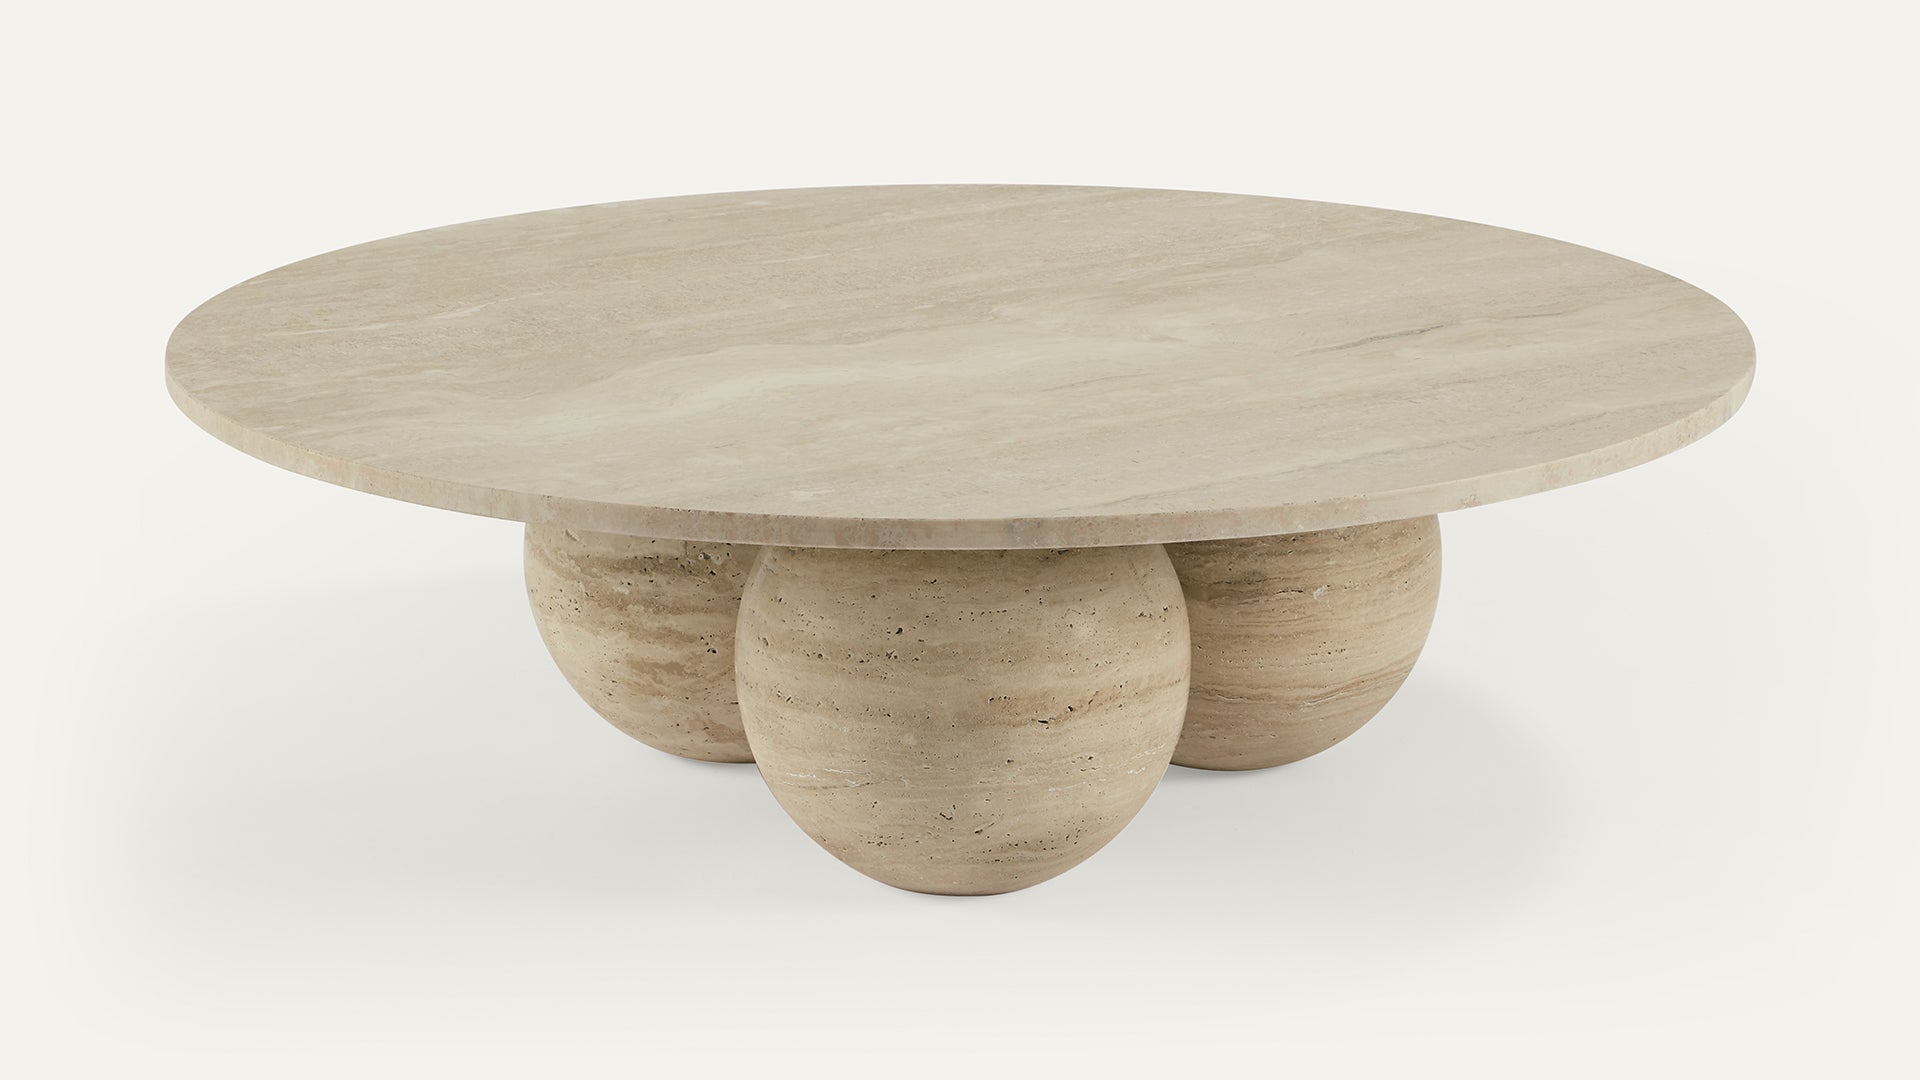 COSMOS Coffee Table in Filled & Honed Romano Travertine with a Centre Cluster